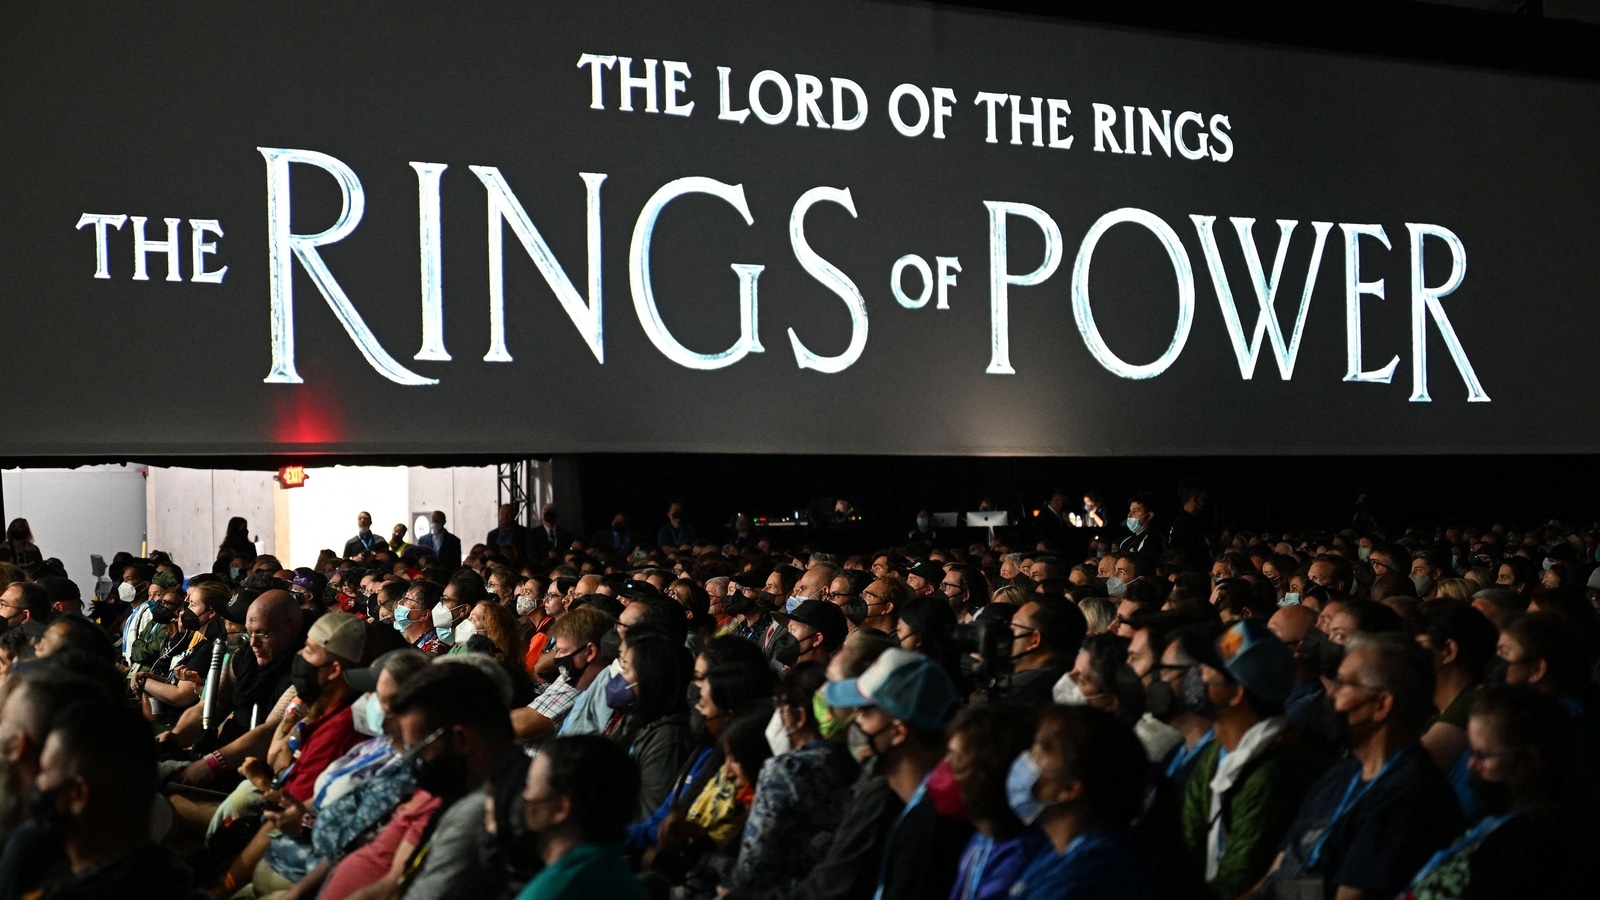 Amazon Prime forges 'Lord of the Rings' prequel hype at Comic-Con